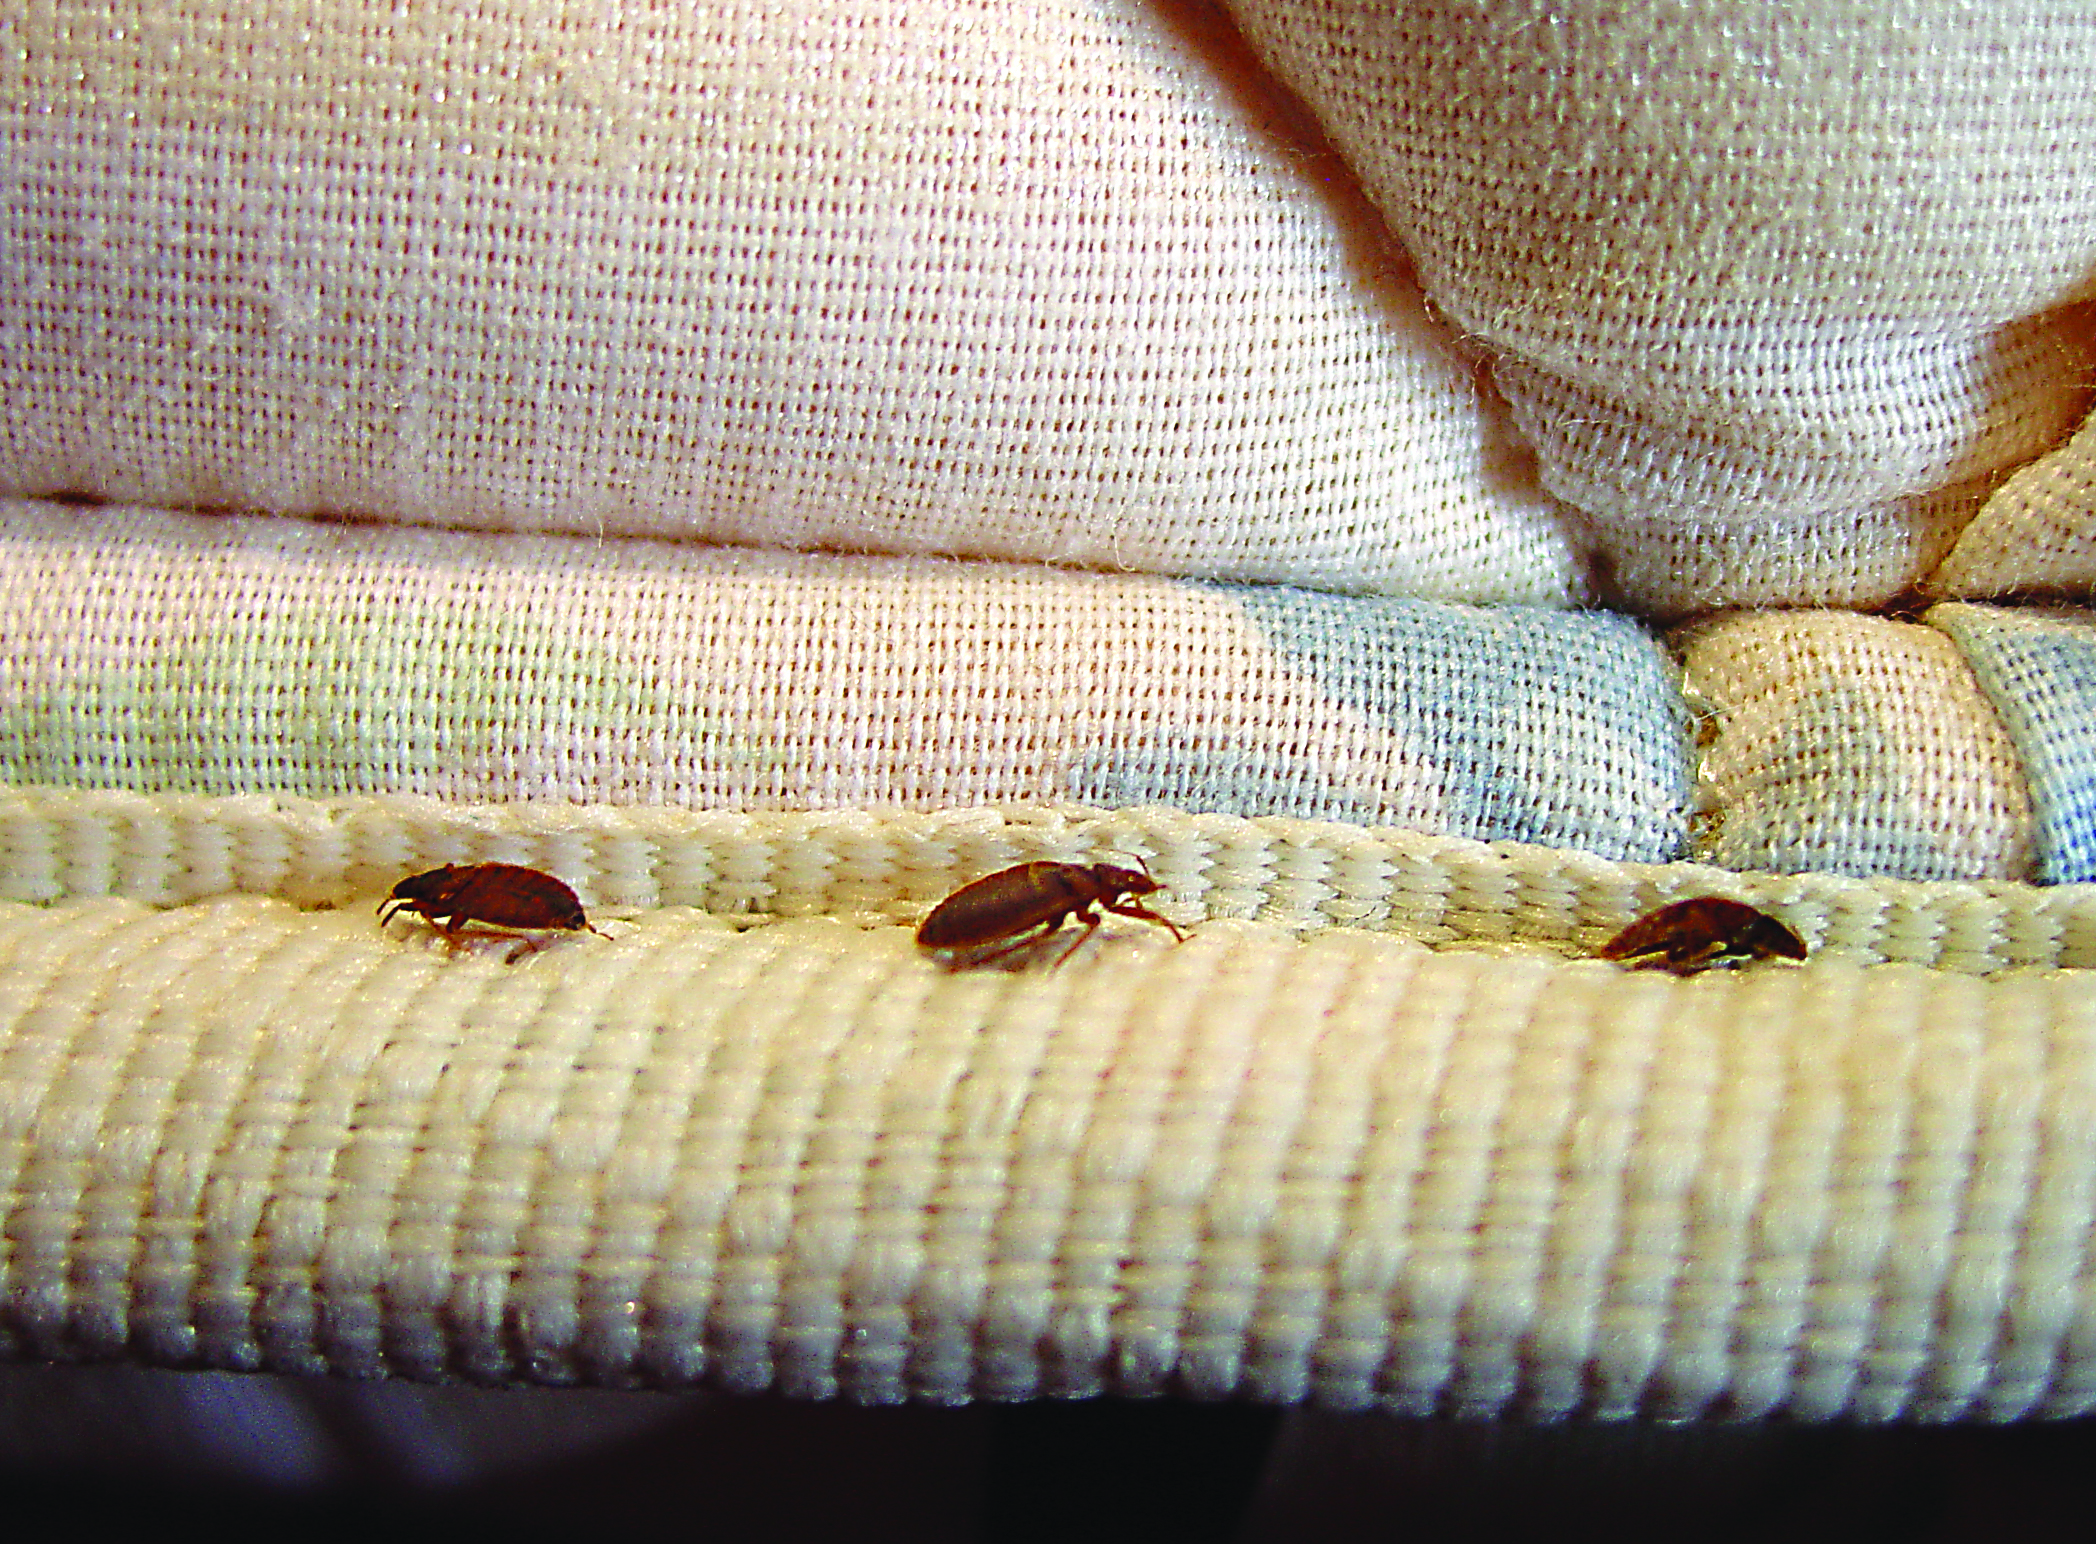 can mattress protectors prevent bed bugs